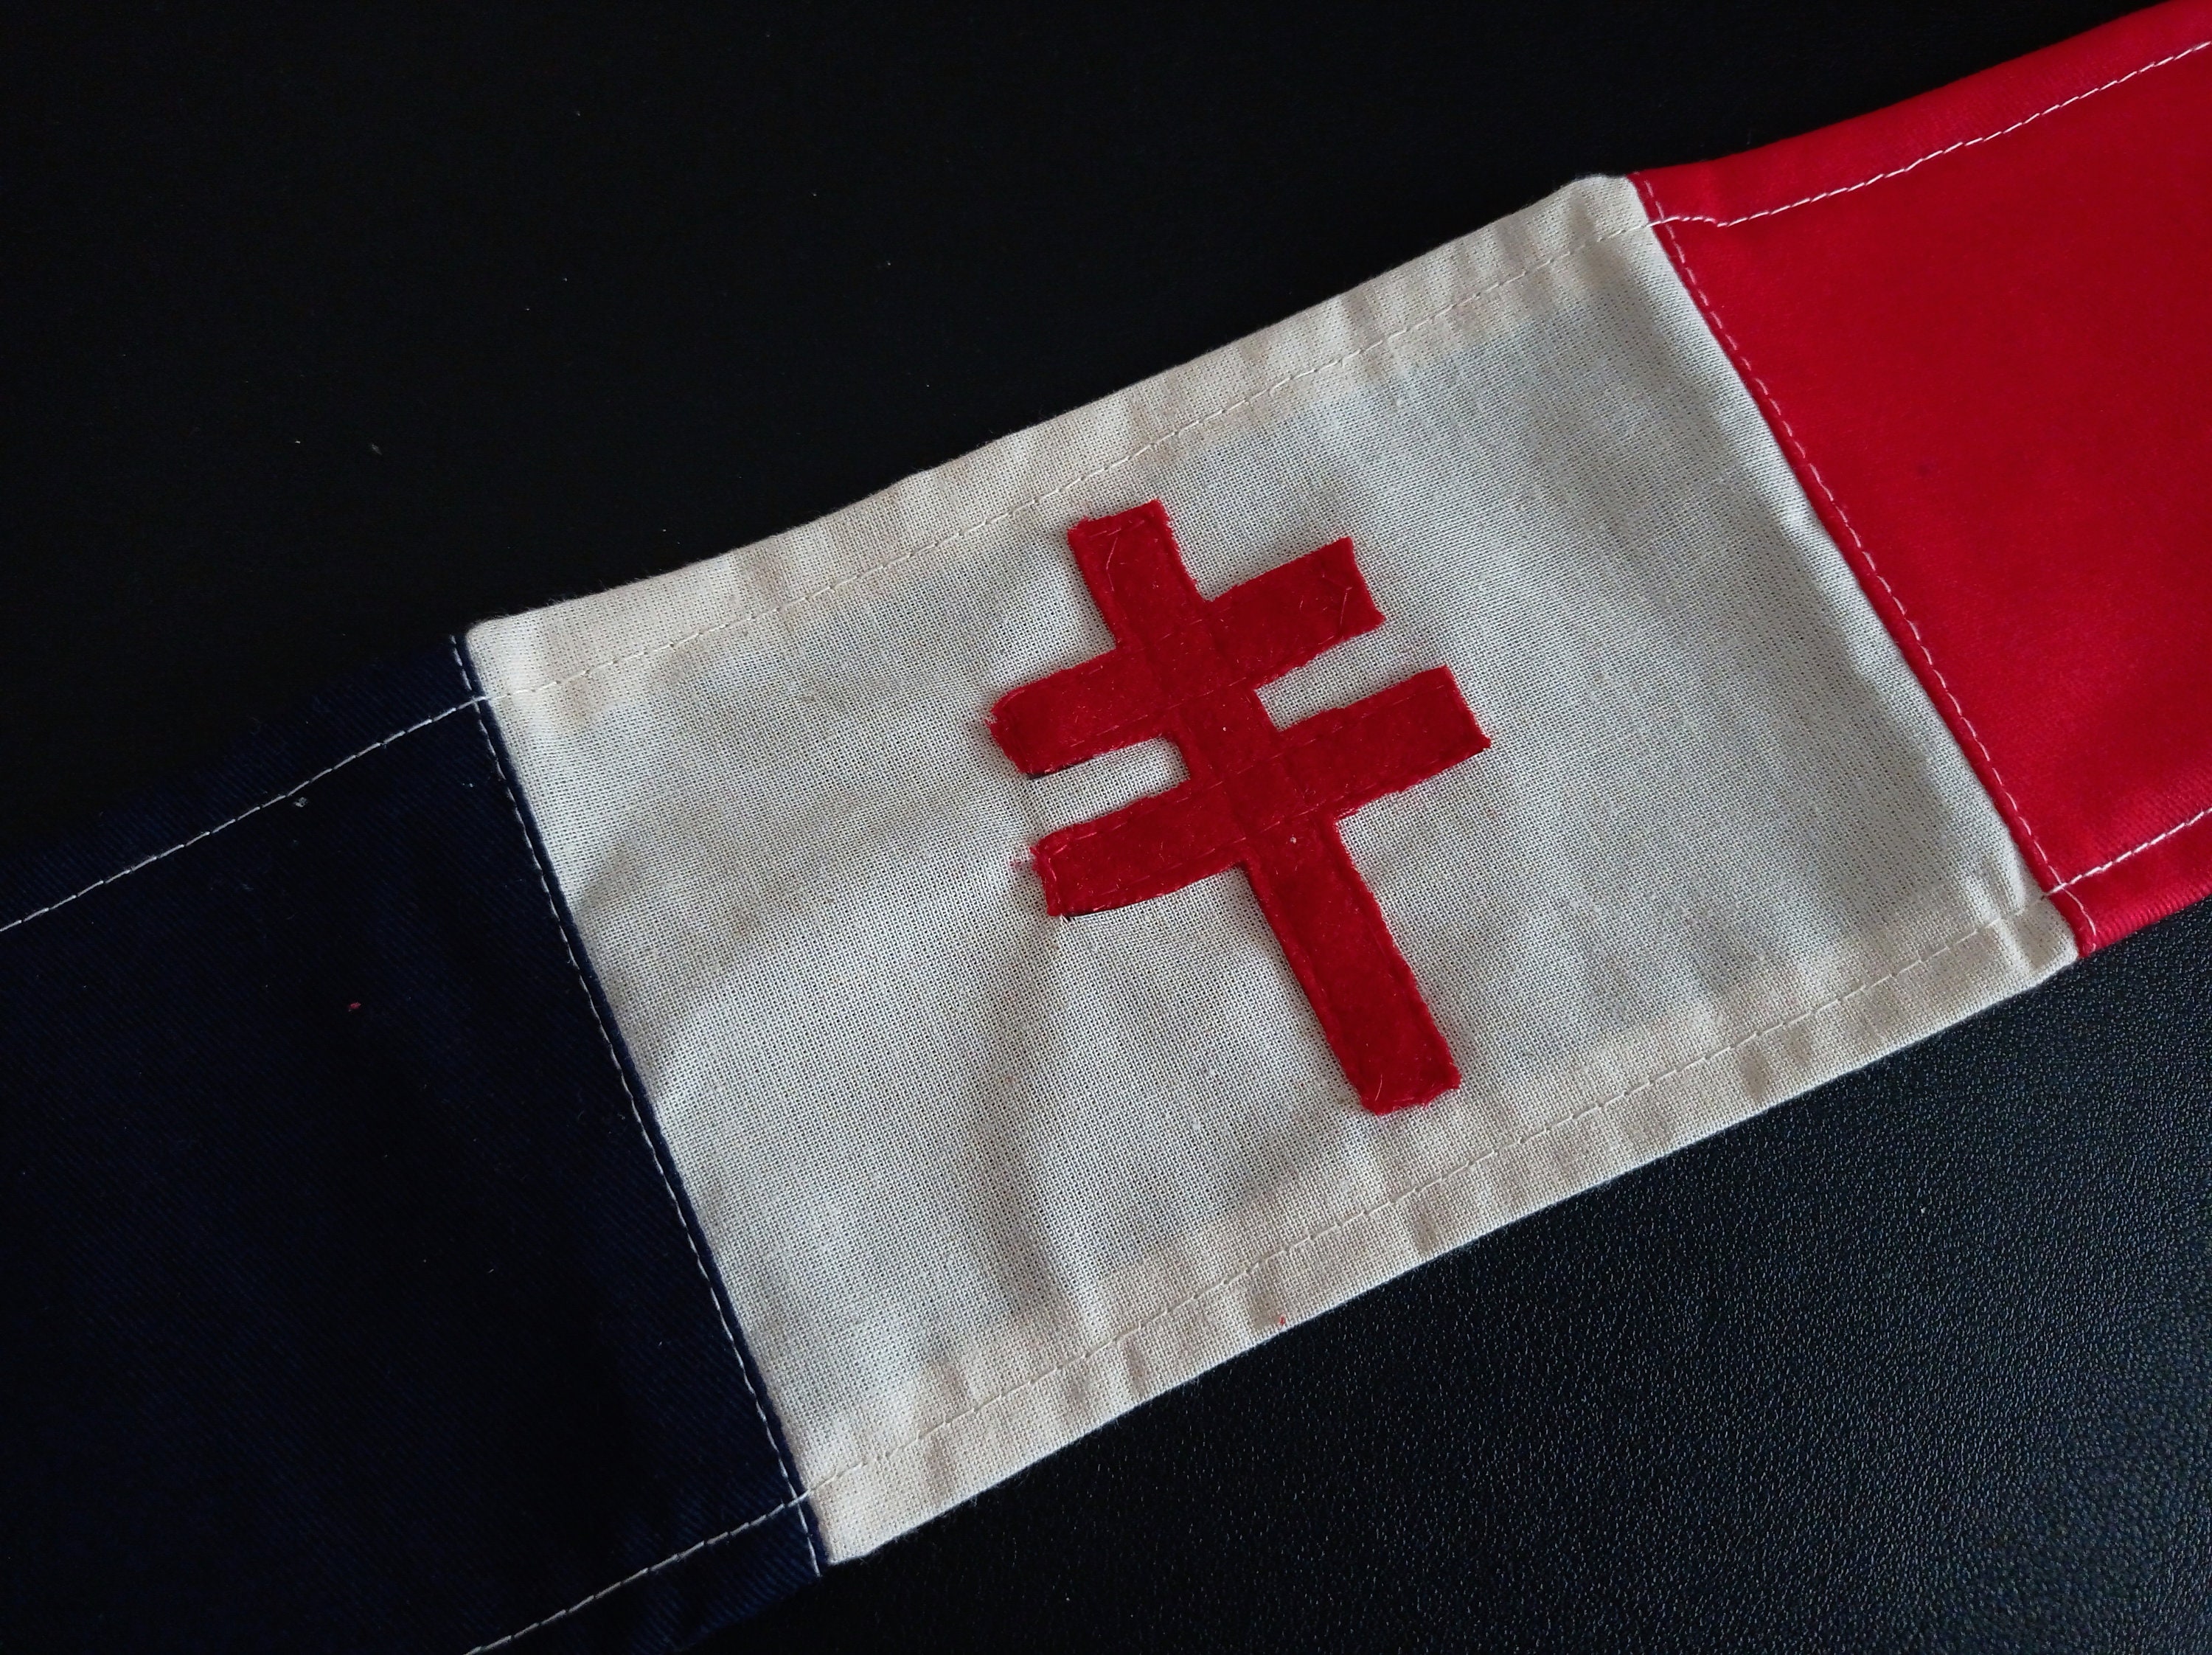 PATCH PATCH EMBROIDERY FRANCE FLAG FREE CROSS OF LORRAINE BADGE NEW FLAG